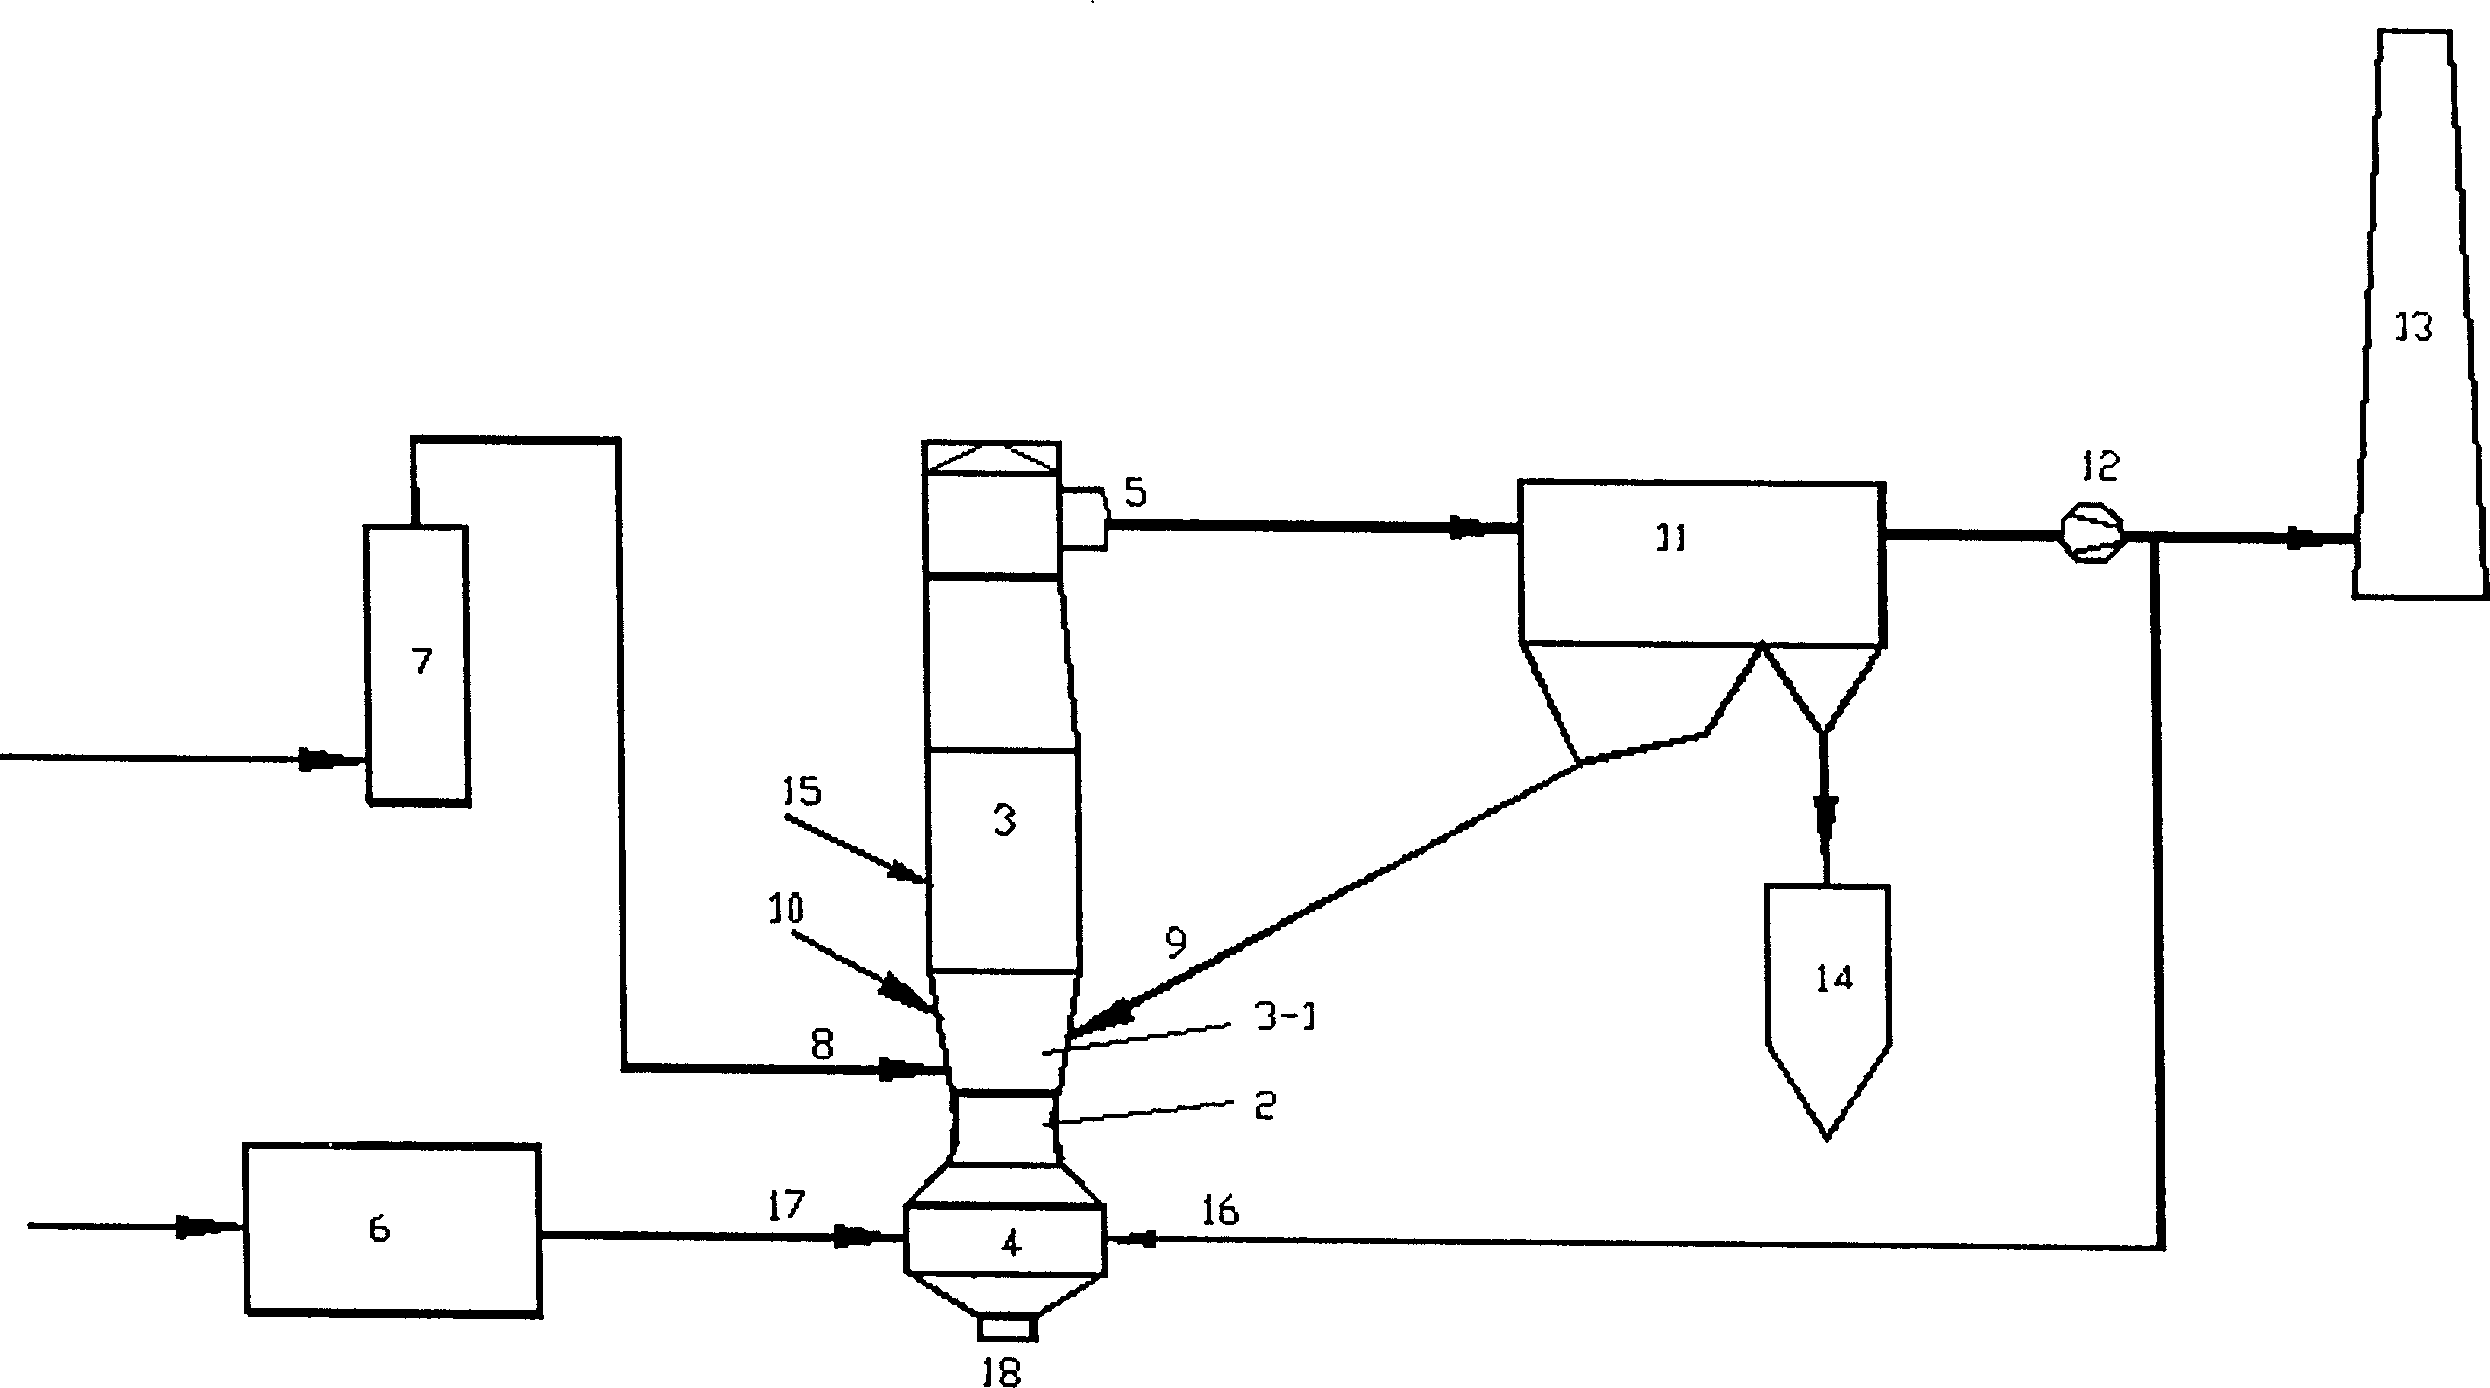 Dry flue gas desulfurizing process with independent feeding, back-returning and water-spraying devices